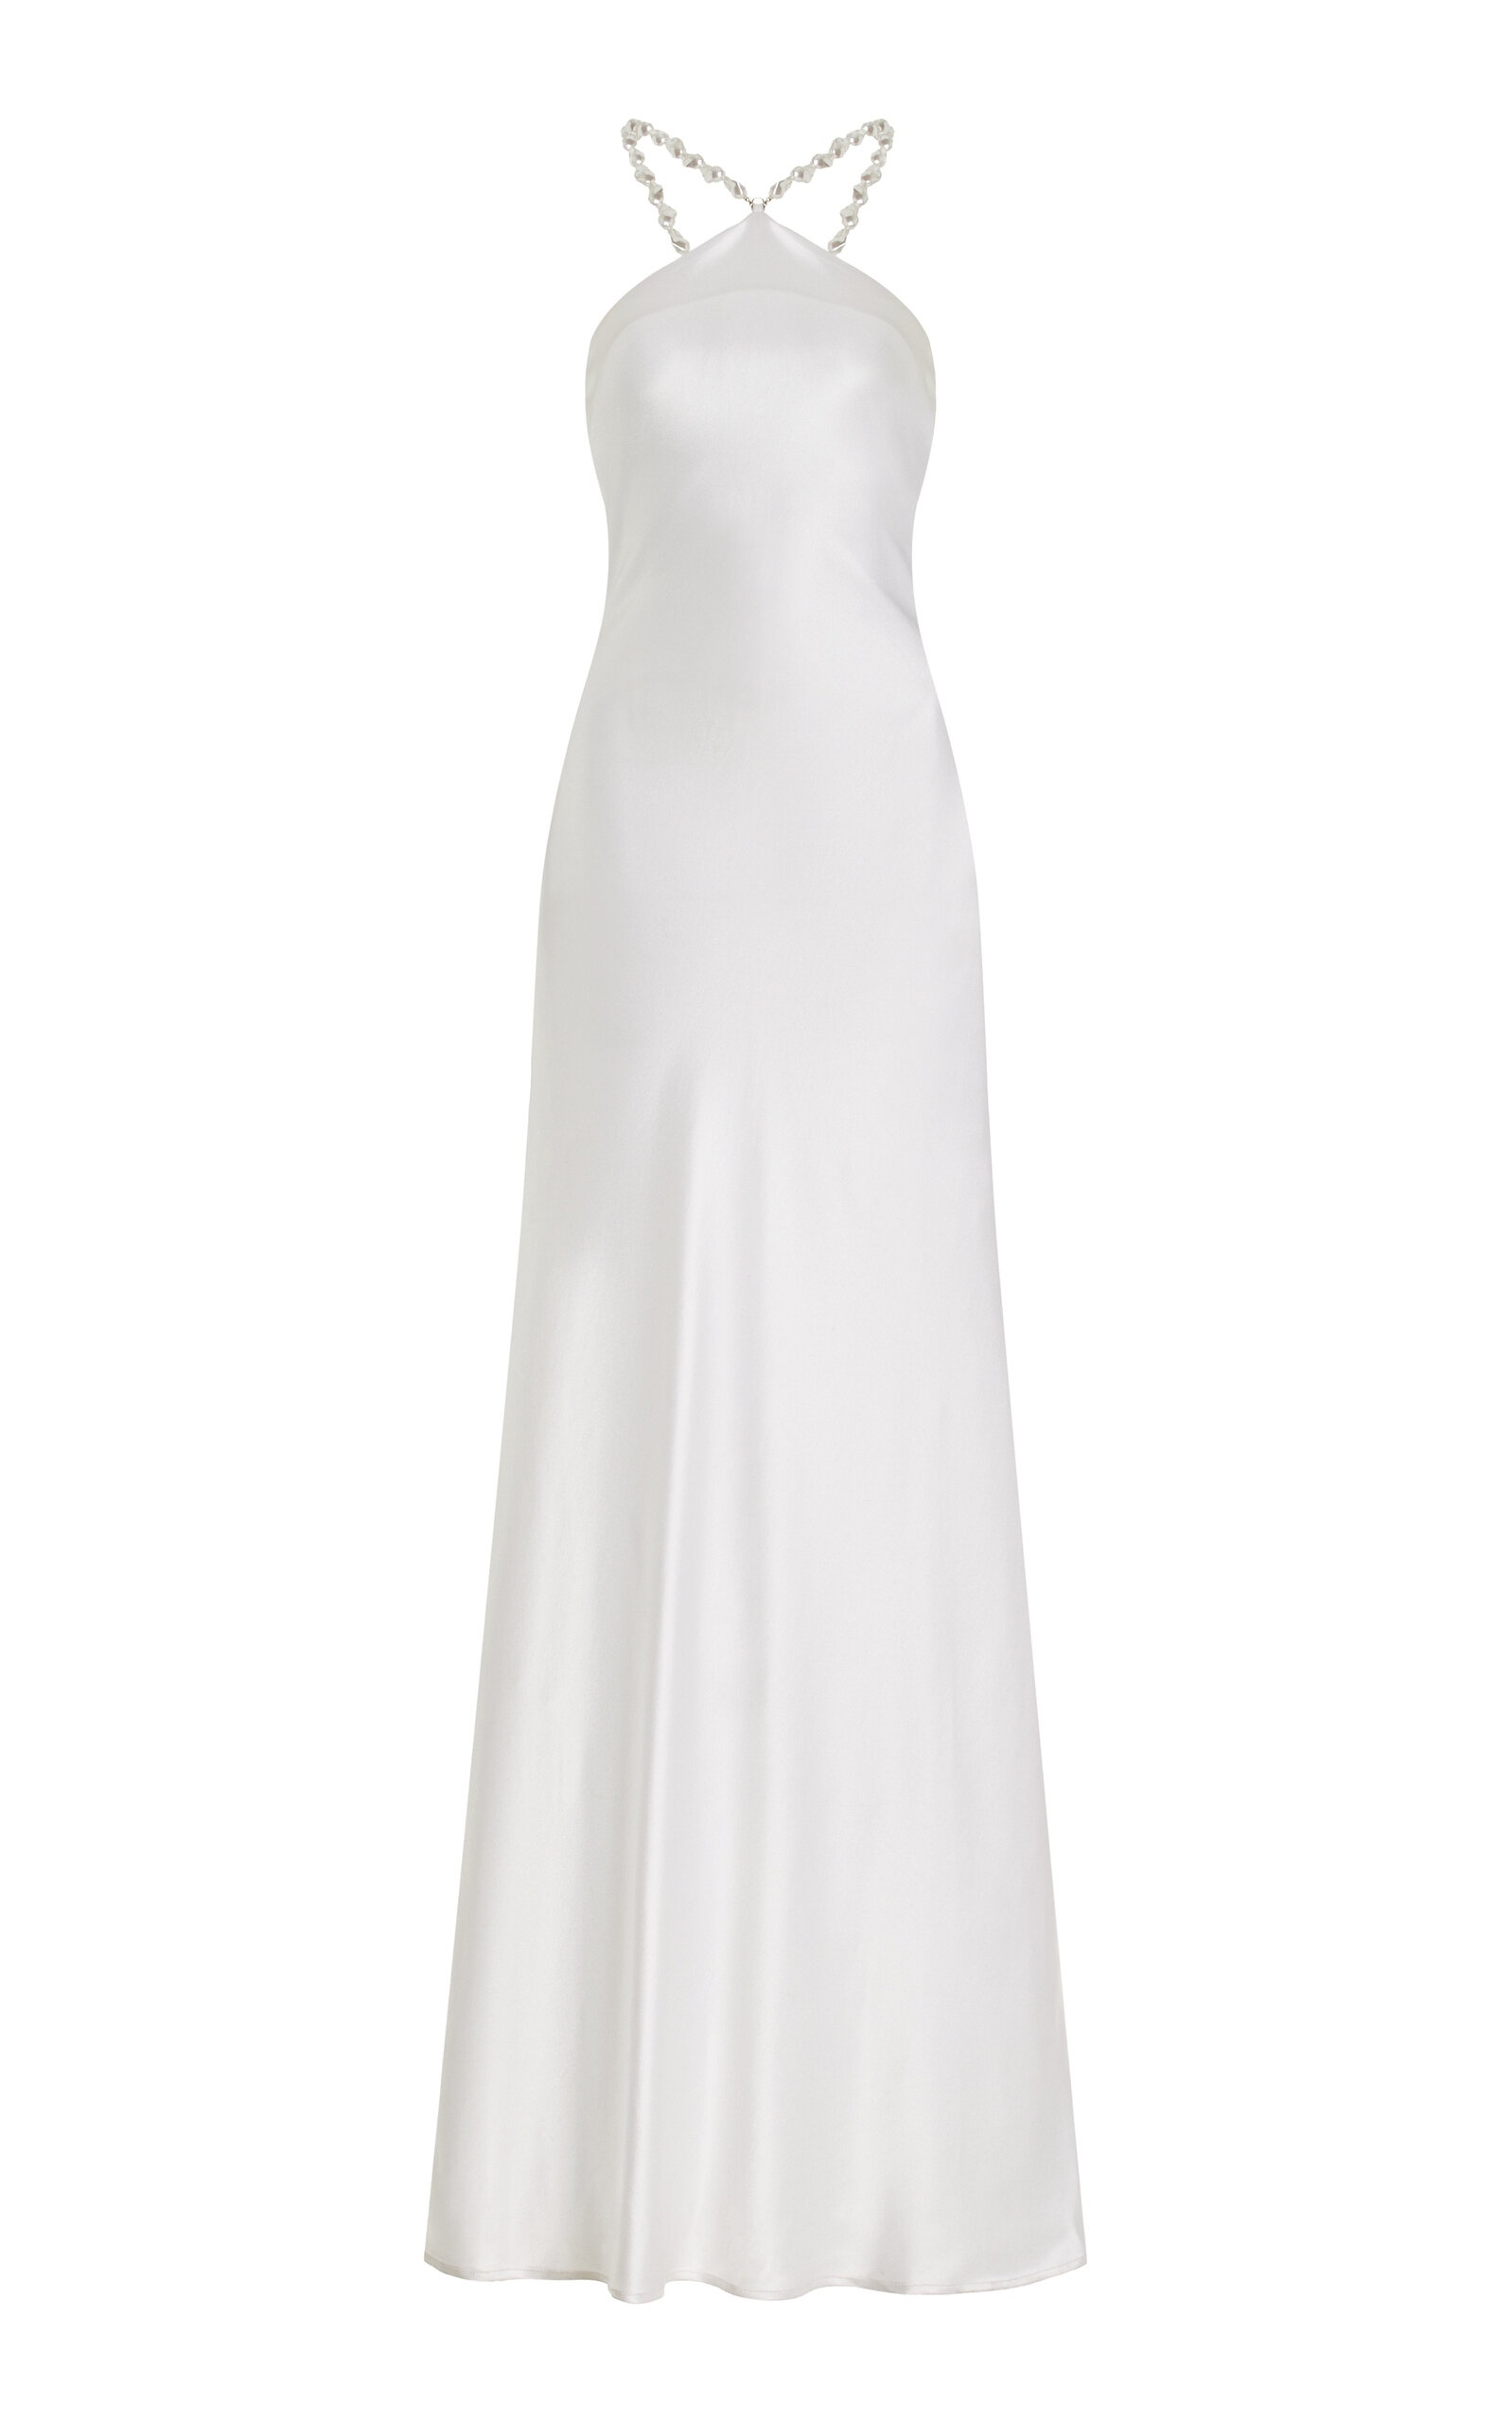 Exclusive Cadence Pearl-Embellished Satin Maxi Slip Dress white - 1